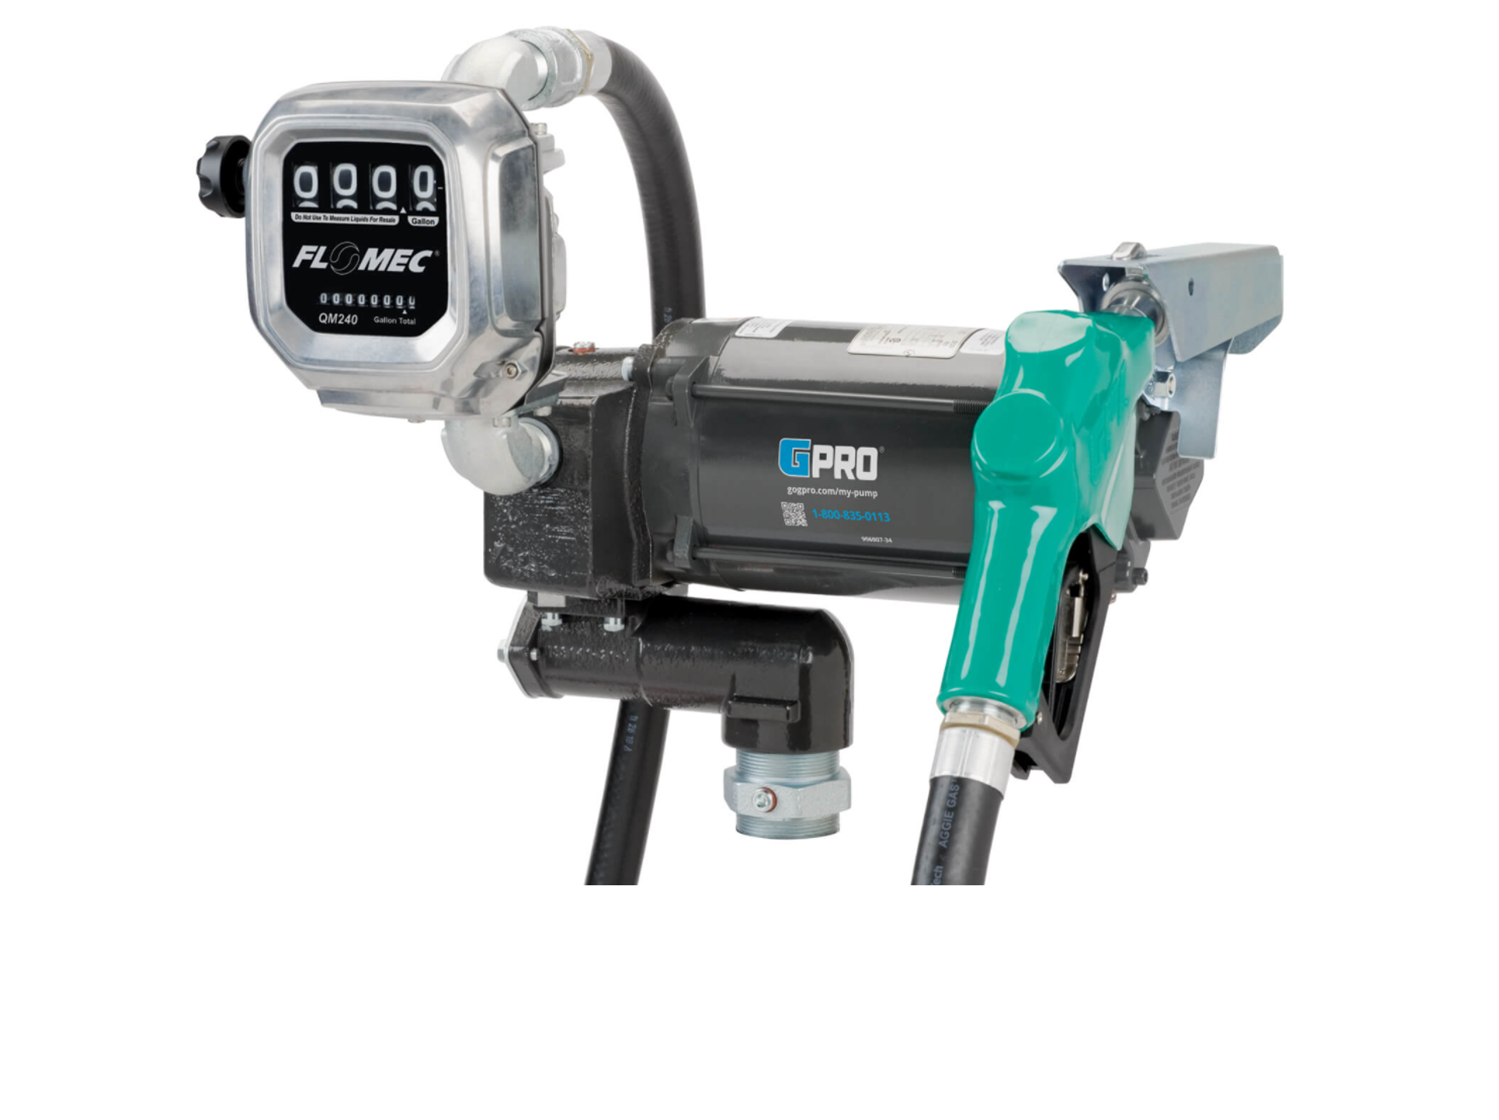 Electric pump GPI #PRO35-115AD/QM150L8N (R663P-4-00), 110 volts, 132LPM (35GPM) with meter QM150 display in litres, automatic nozzle 1", hose 1"x18ft, suction pipe not include